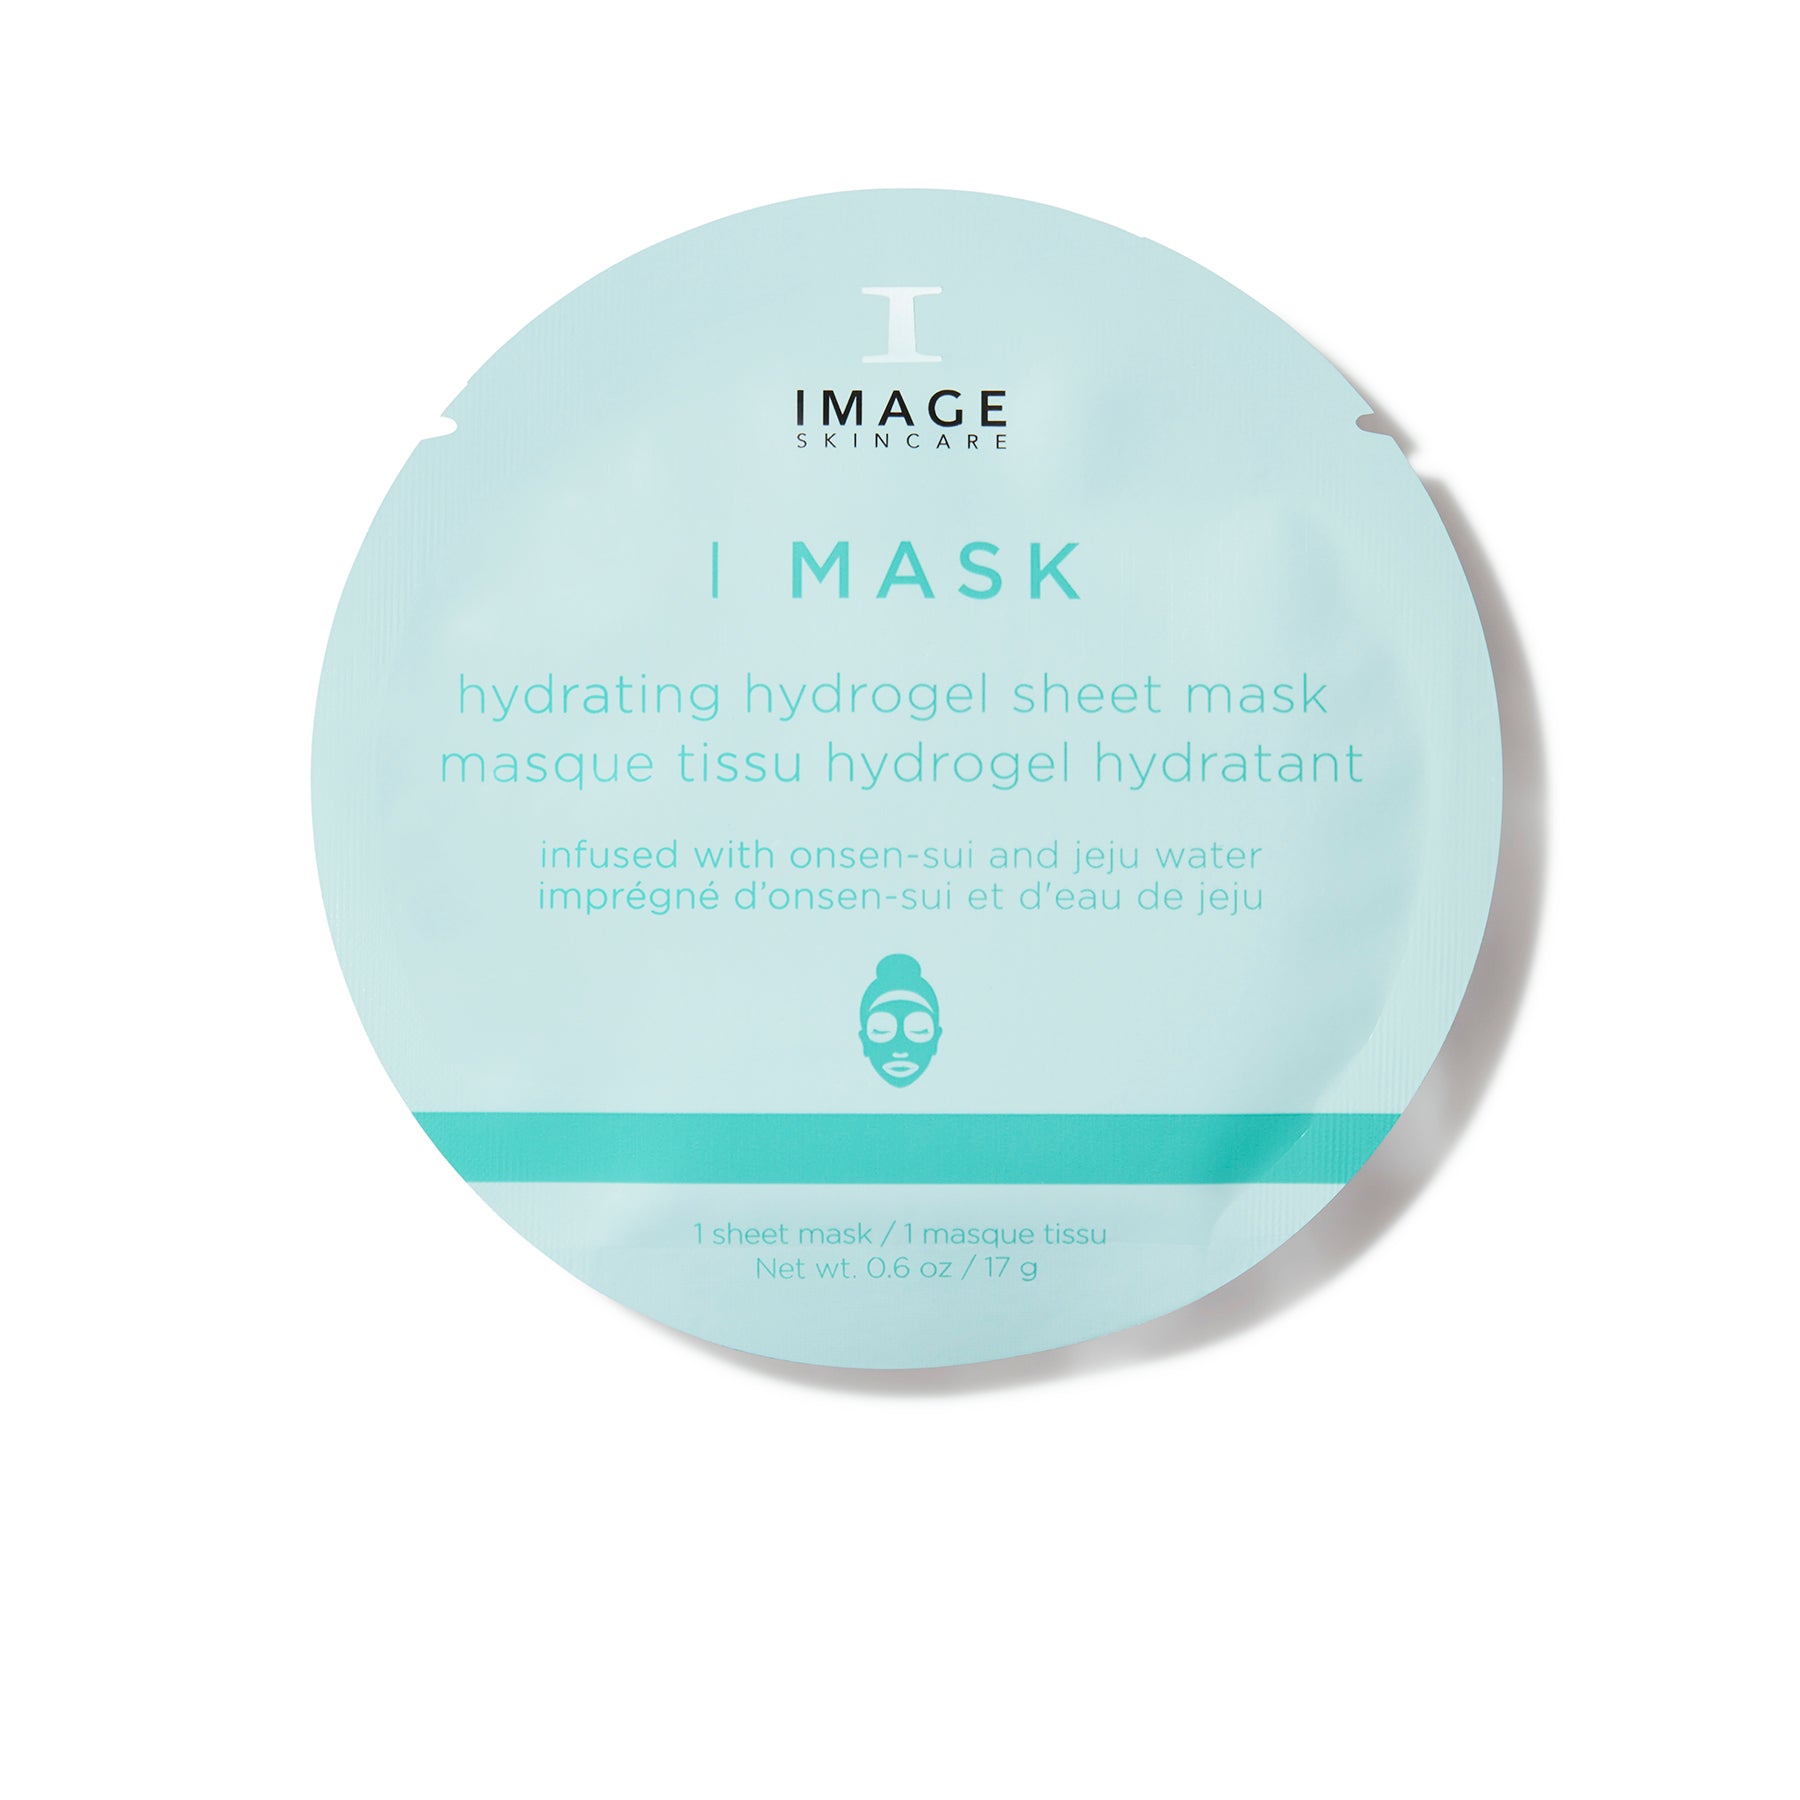 Image Skincare I Mask Hydrating Hydrogel Sheet Mask Single Pack Shop At Exclusive Beauty